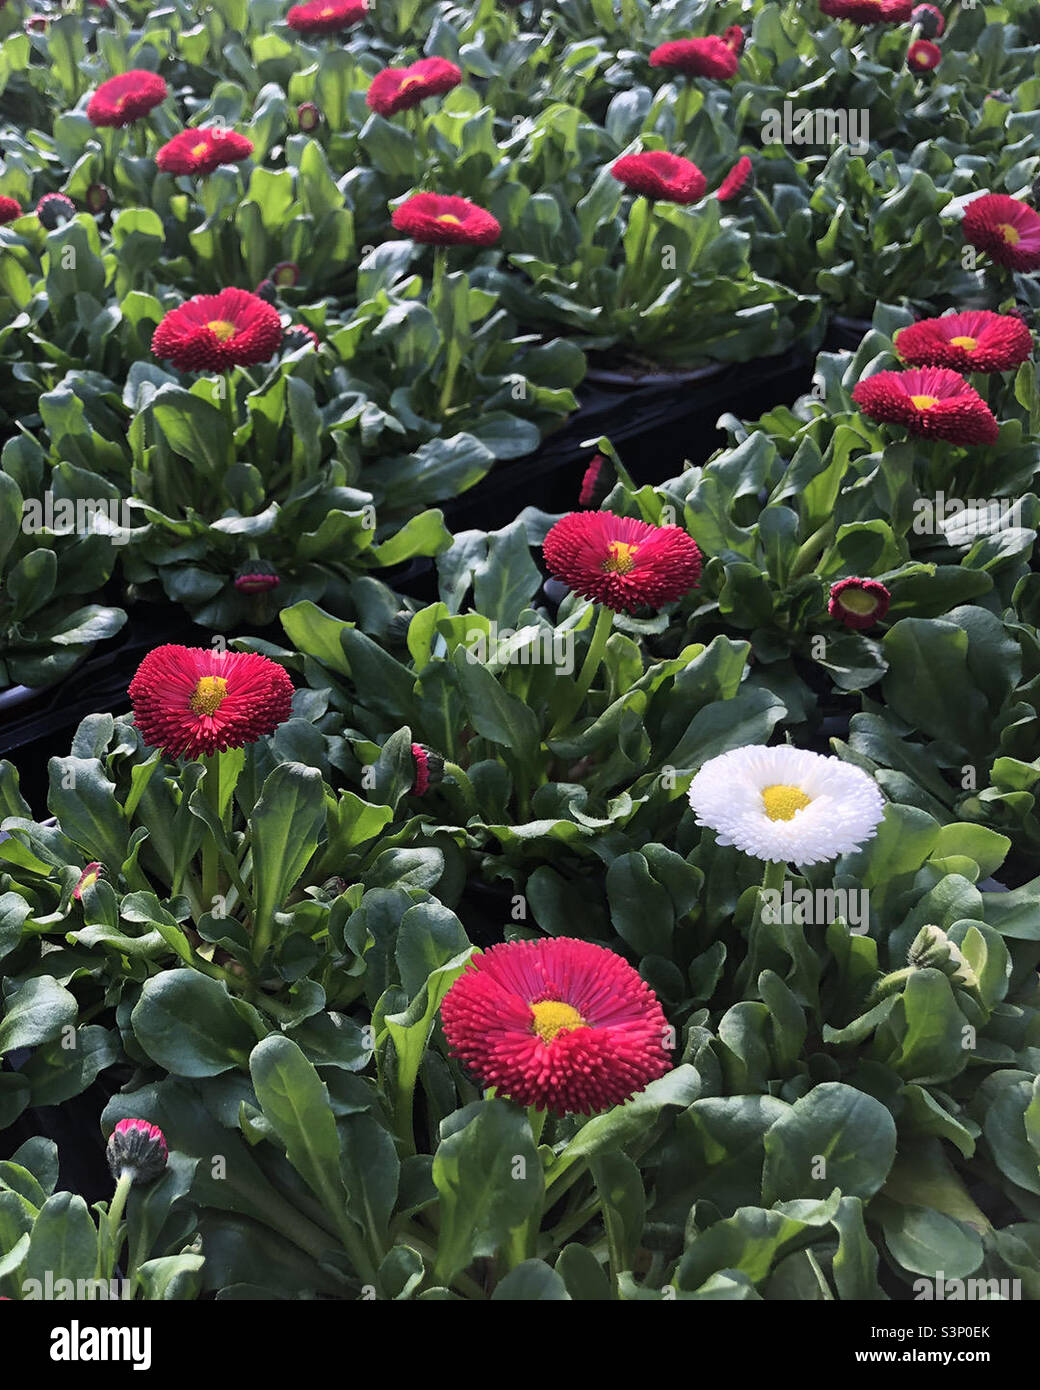 A white flower in the middle of other reds among green leaves. Diversity, Different is beautiful. Stock Photo